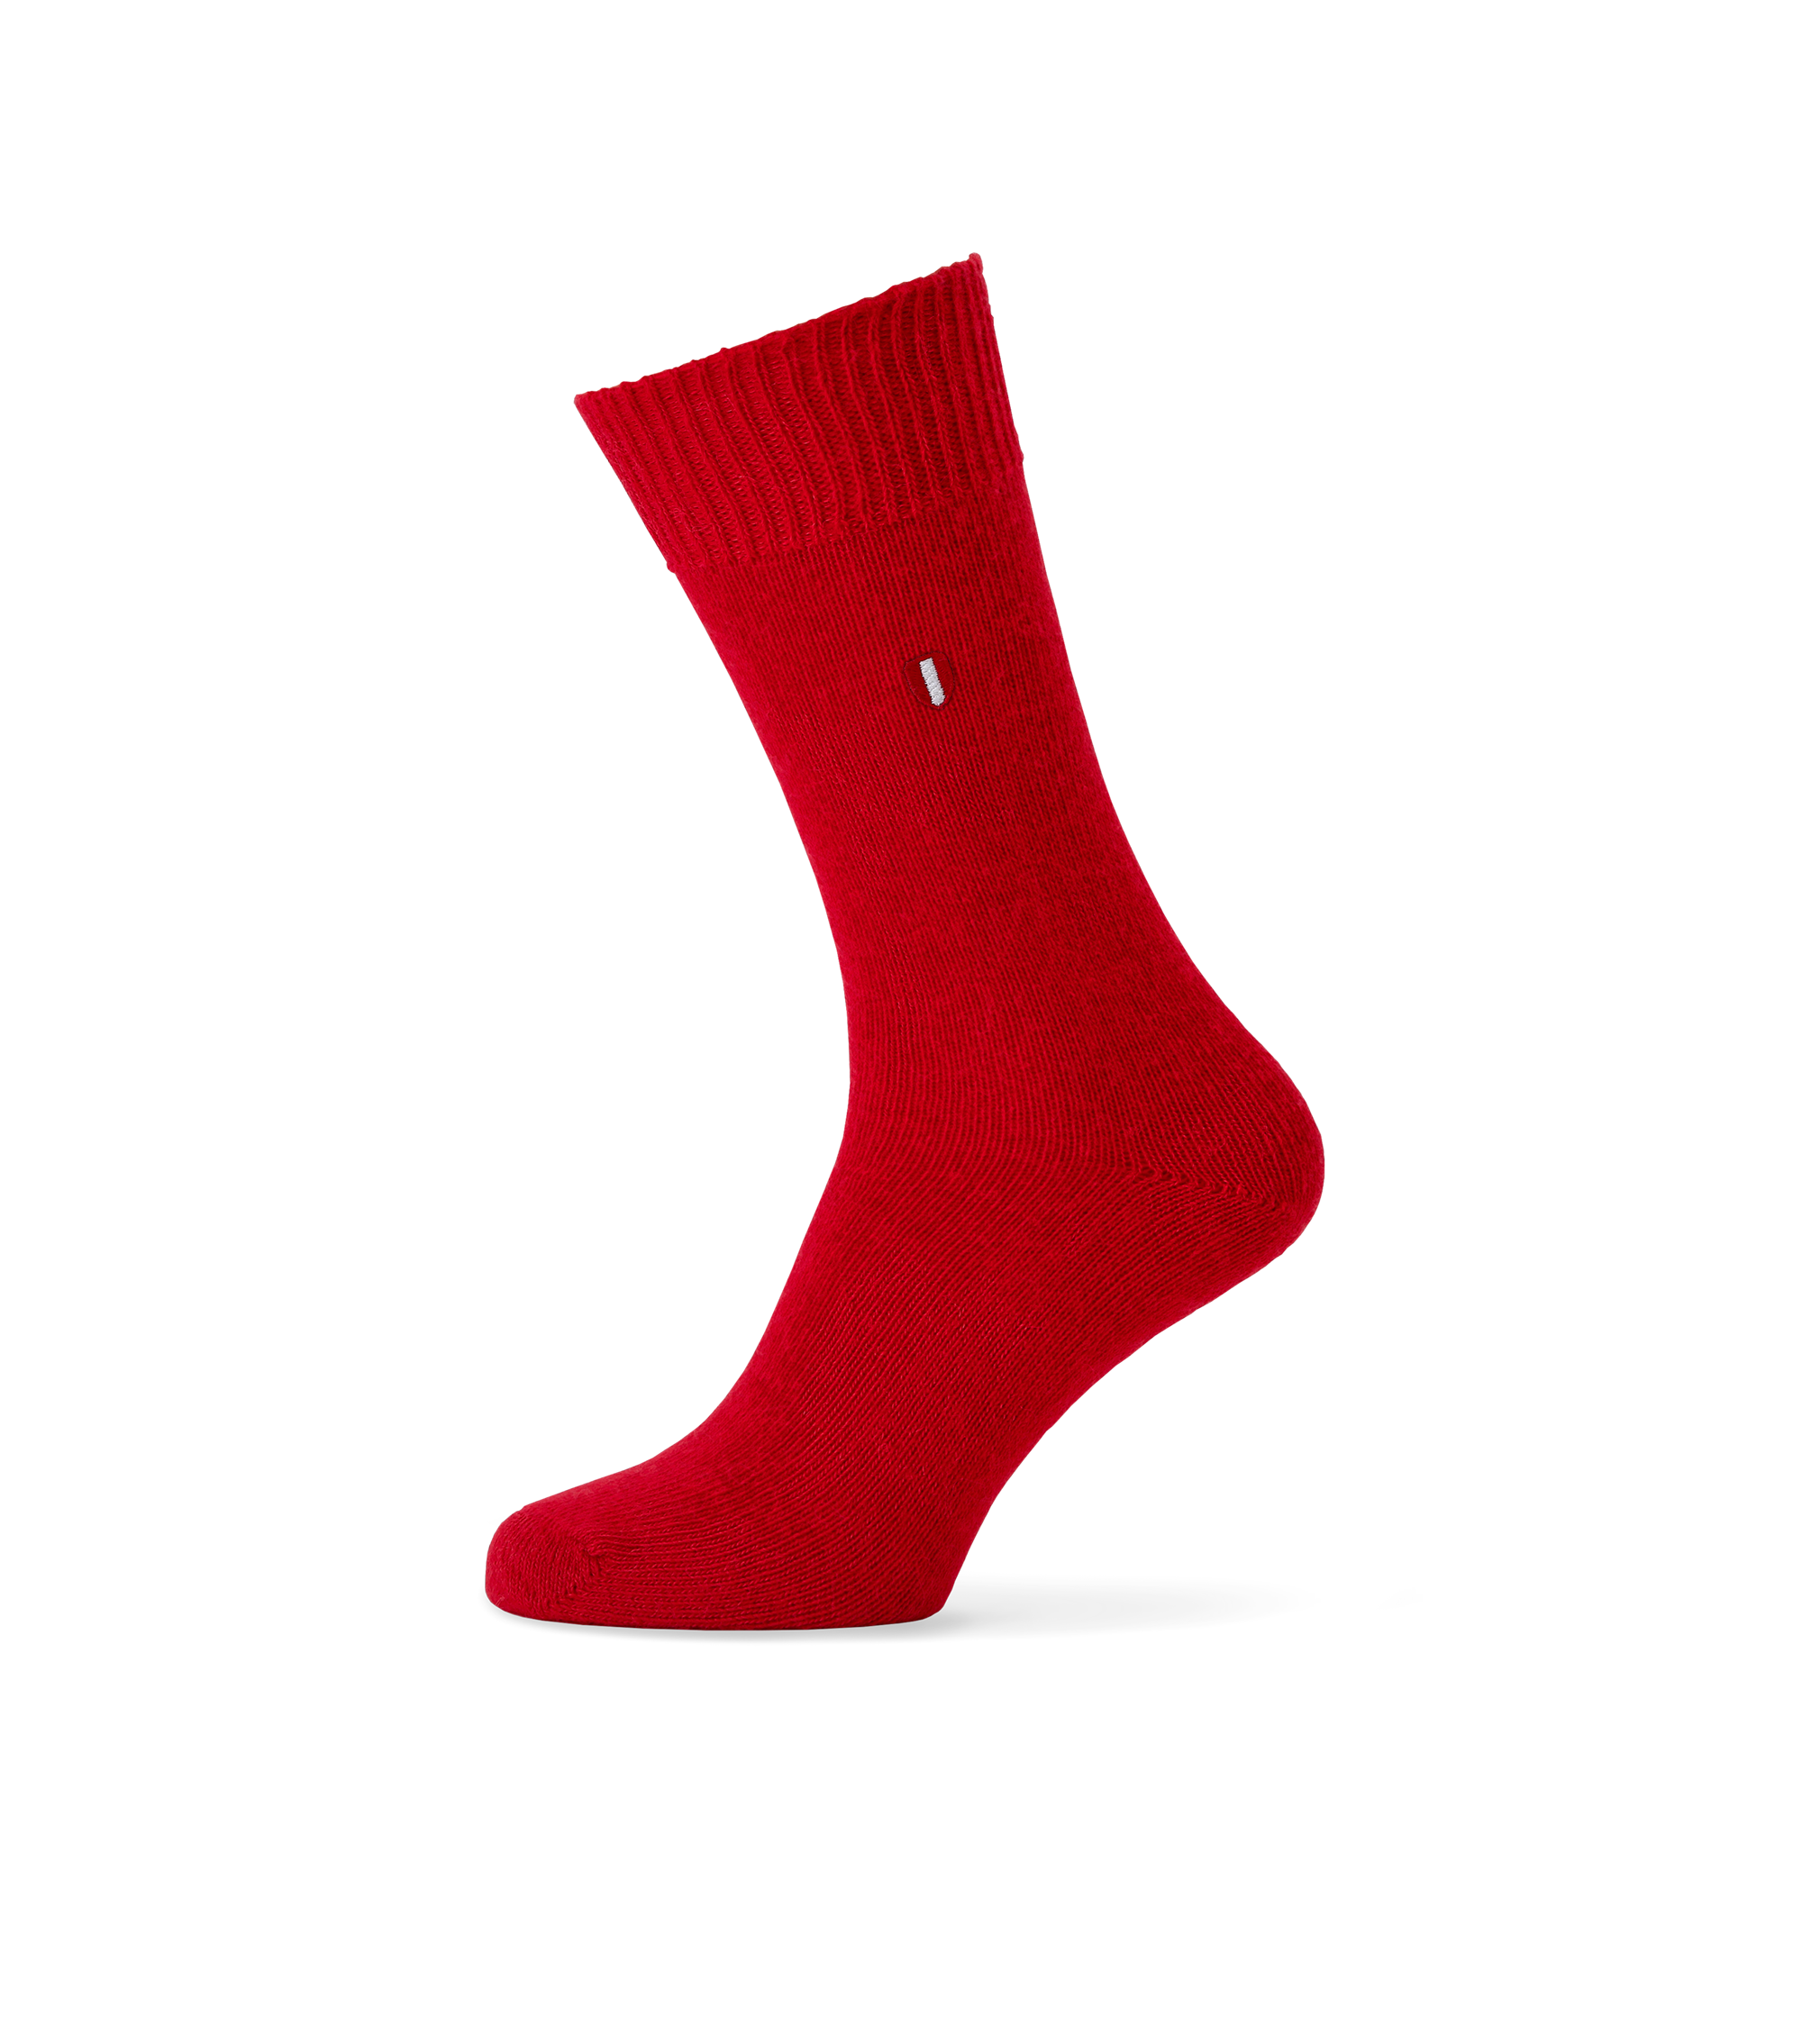 Vale Knitted Merino Sock Flaming Red Coxmoore Wool Woolen Clothing UK